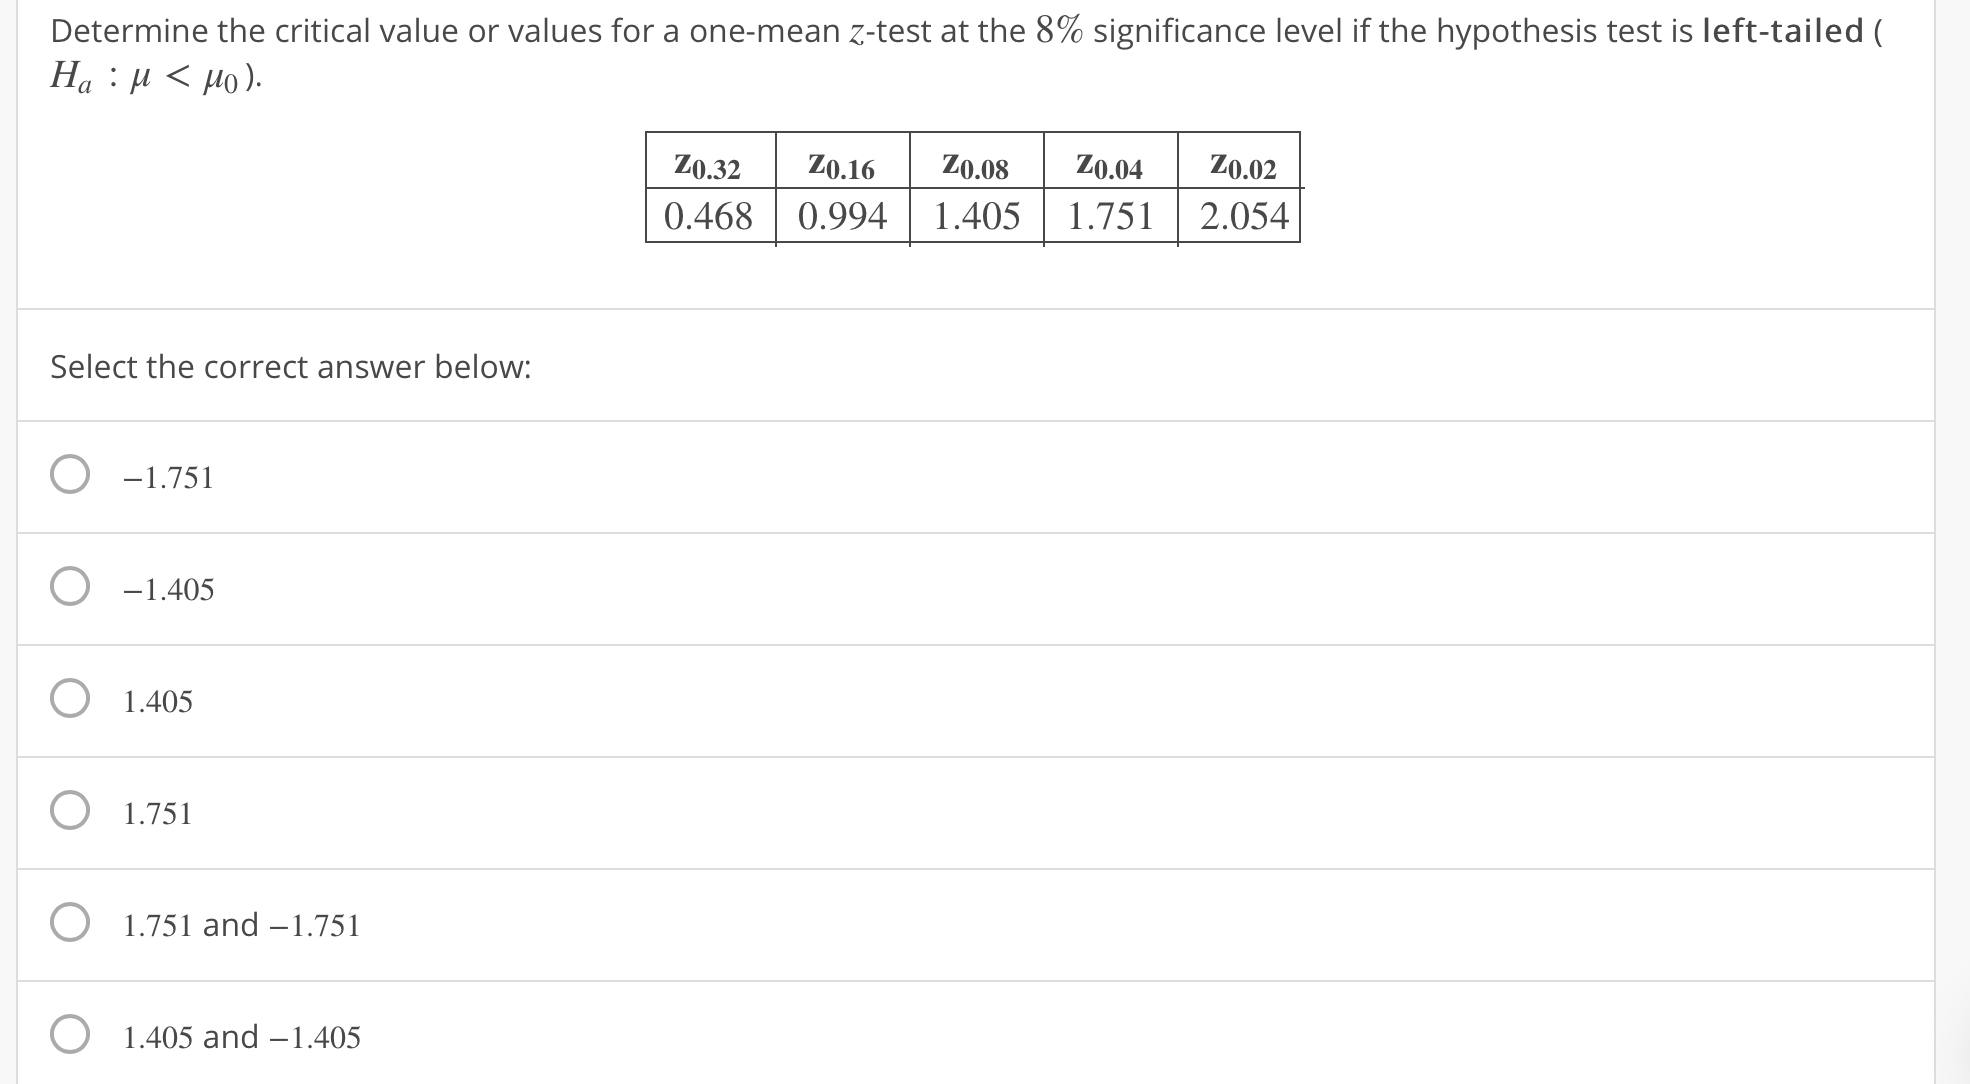 Determine the critical value or values for a one-mean z-test at the 8% significance level if the hypothesis test is left-tailed (
0.32 0.16 .8 0.040.02
0.468 0.994| 1.405 1.7512.054
Select the correct answer below:
O-1.751
O -1.405
O 1.405
O1.751
O 1.751 and -1.751
O
1.405 and -1.405
